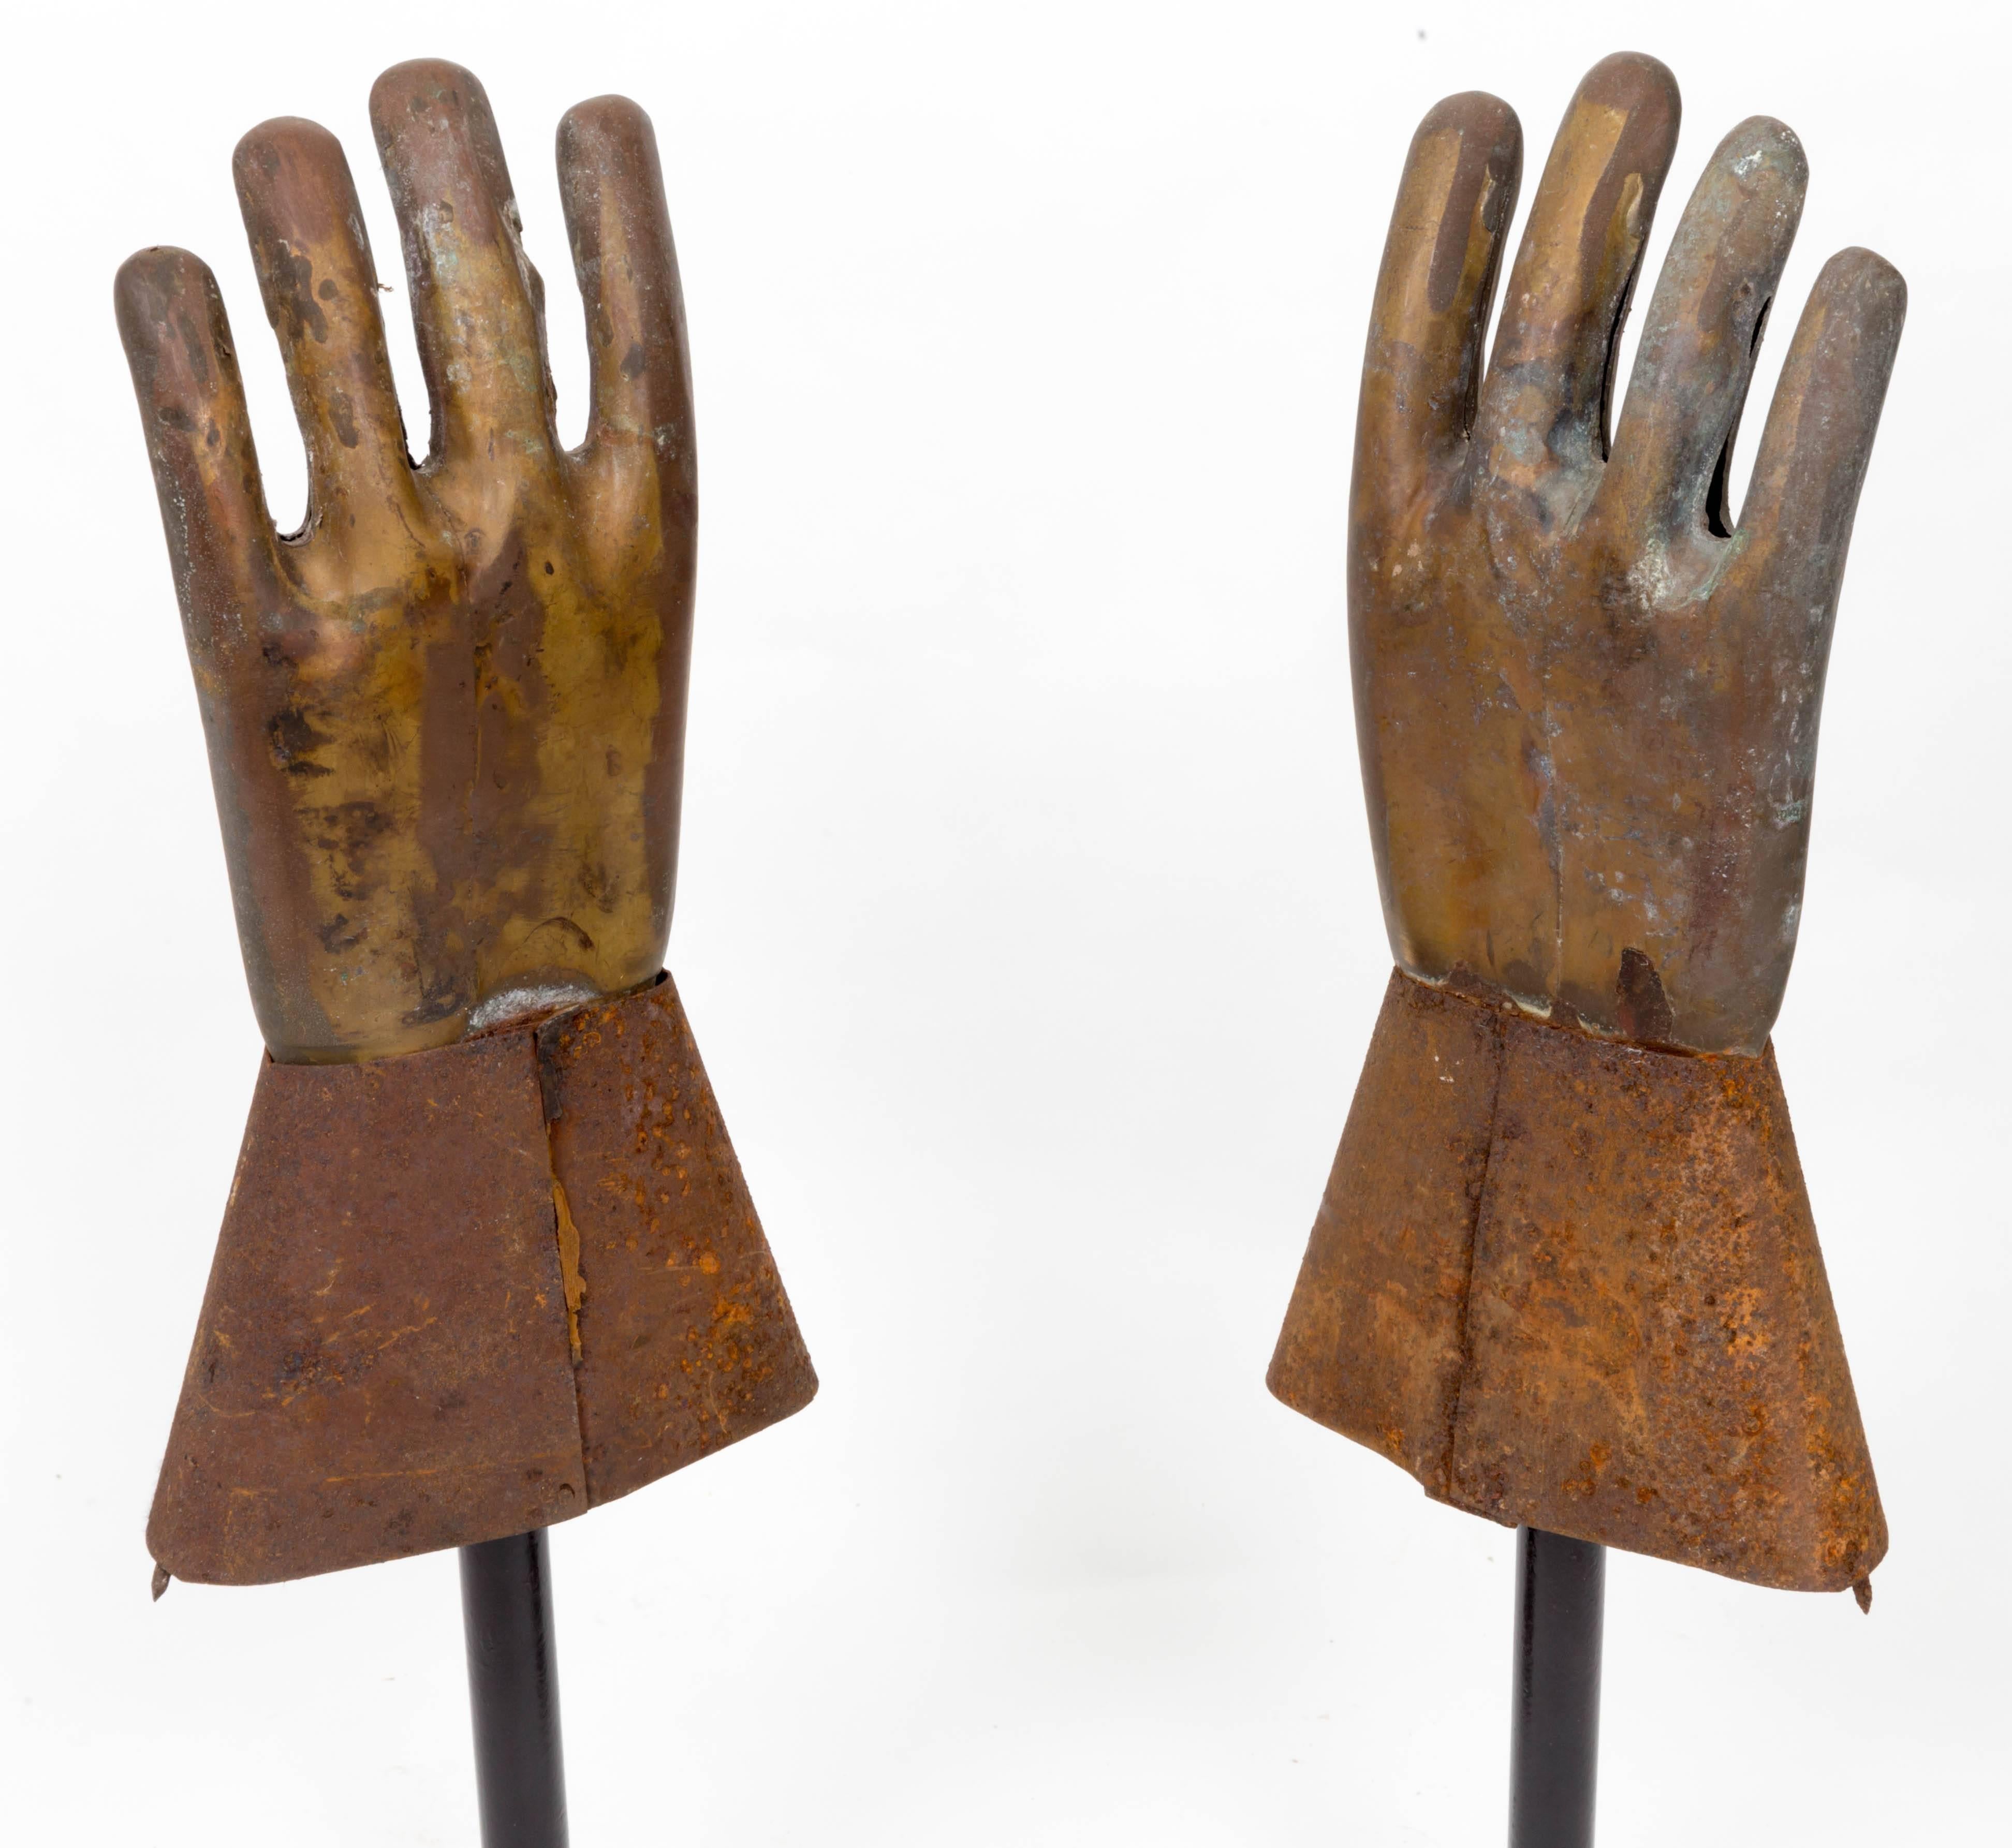 Pair of Industrial Metal Glove Hand Molds In Good Condition For Sale In Southampton, NY